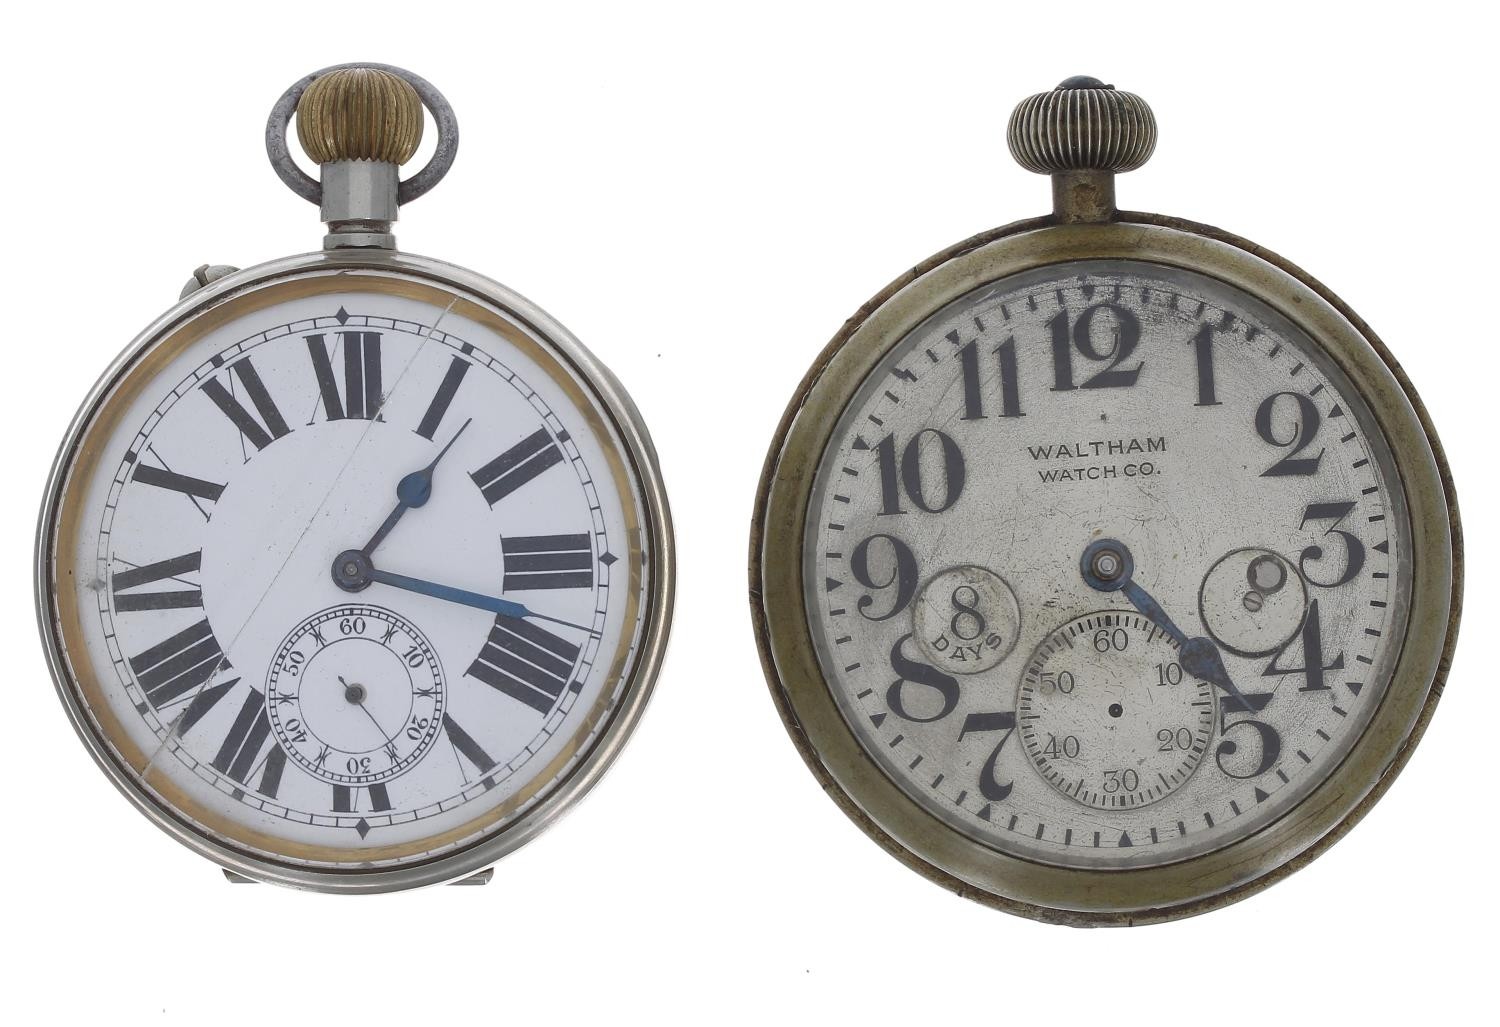 Longines Baume nickel cased Goliath pocket watch, the movement signed Longines Baume with plain - Image 5 of 7